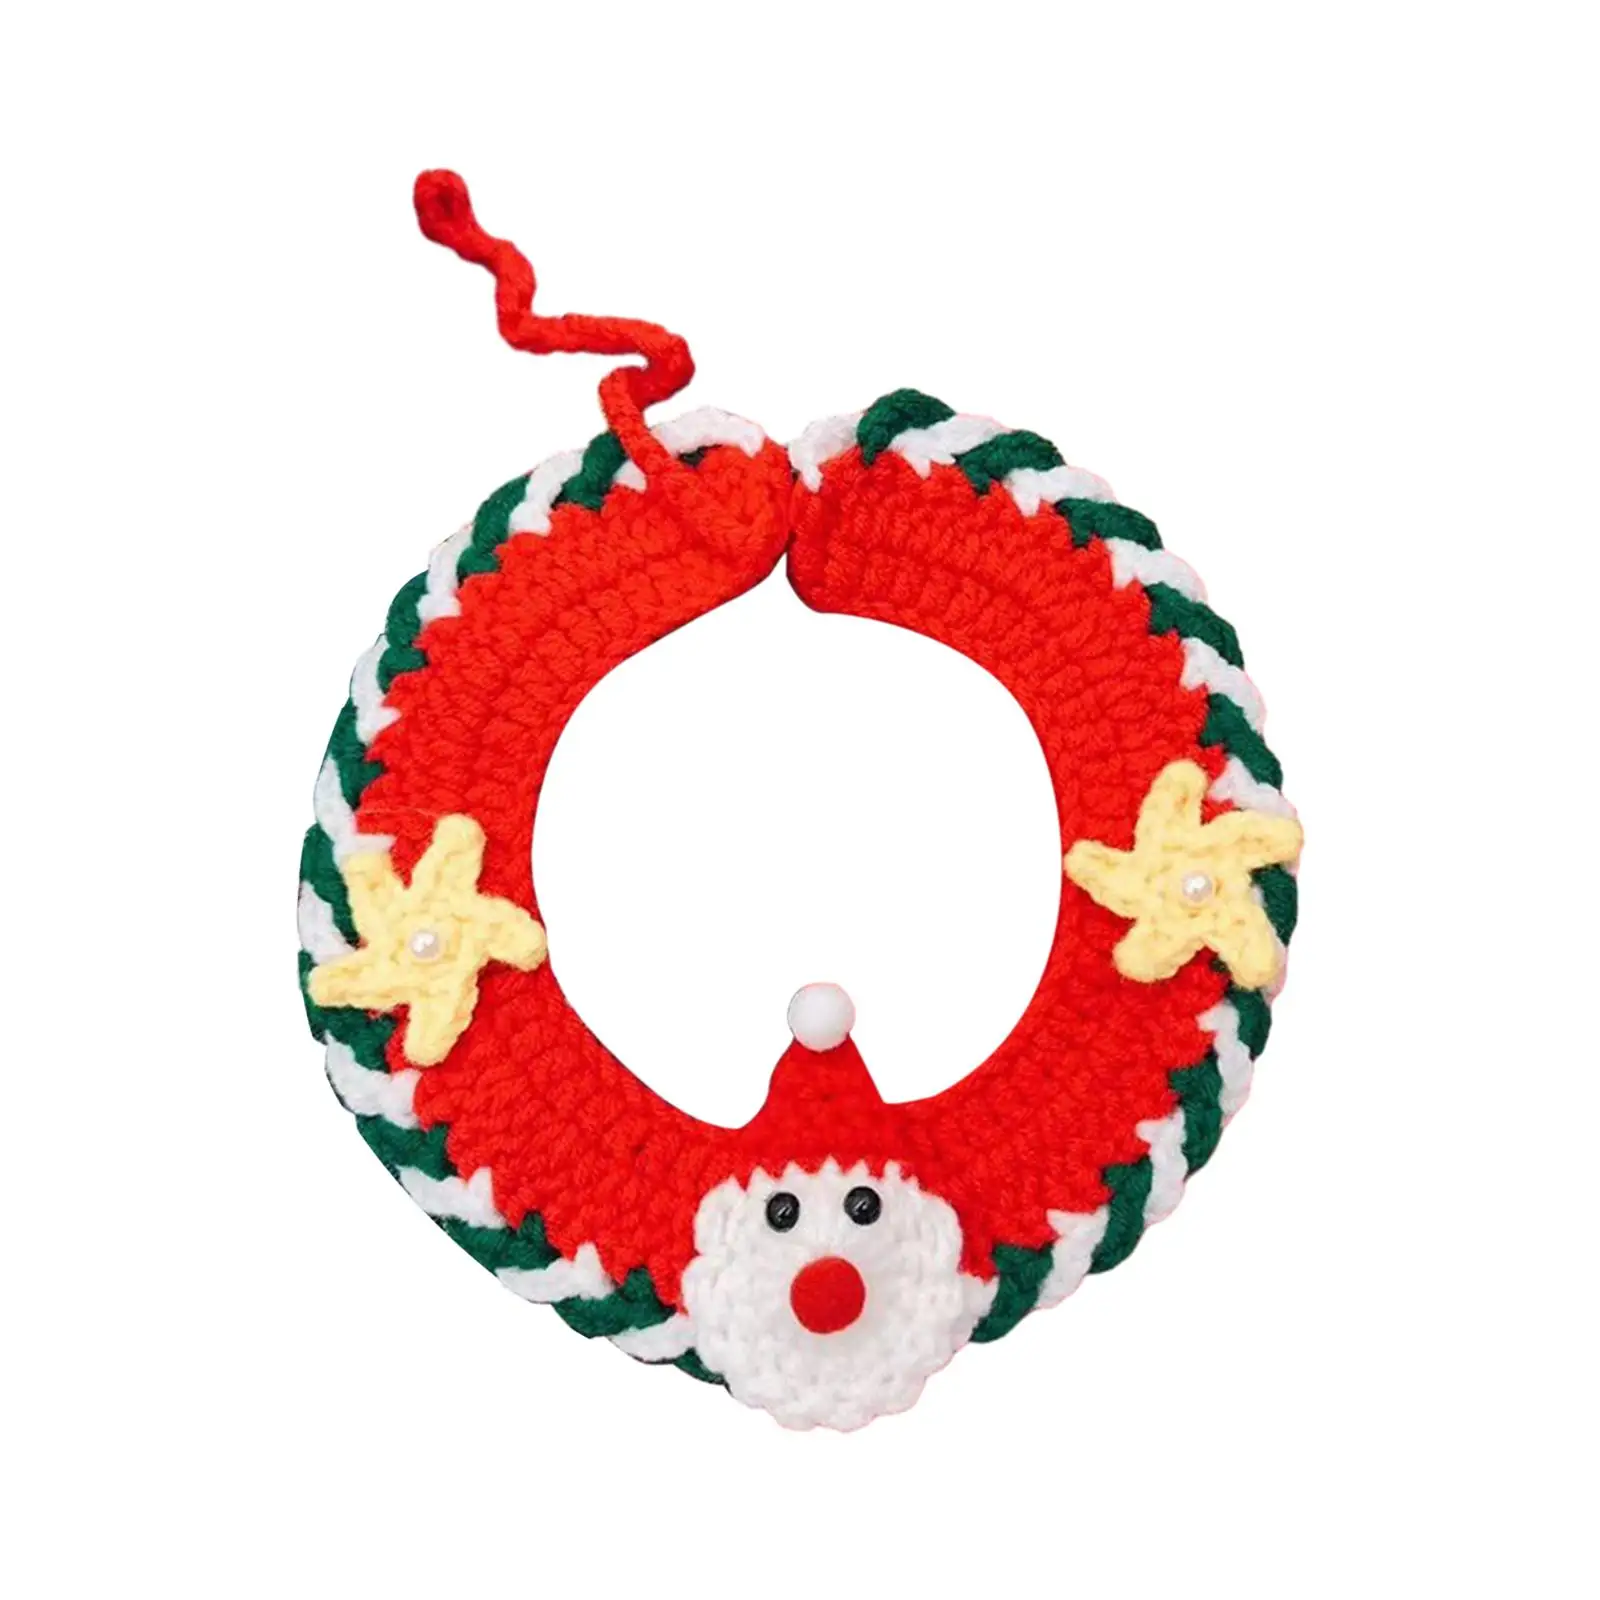 Knitting Cat Collar Gift Santa Claus Festive Decoration Holiday for Cat and Dog Neckwear Hand Woven Scarf Kitten Necklace Scarf